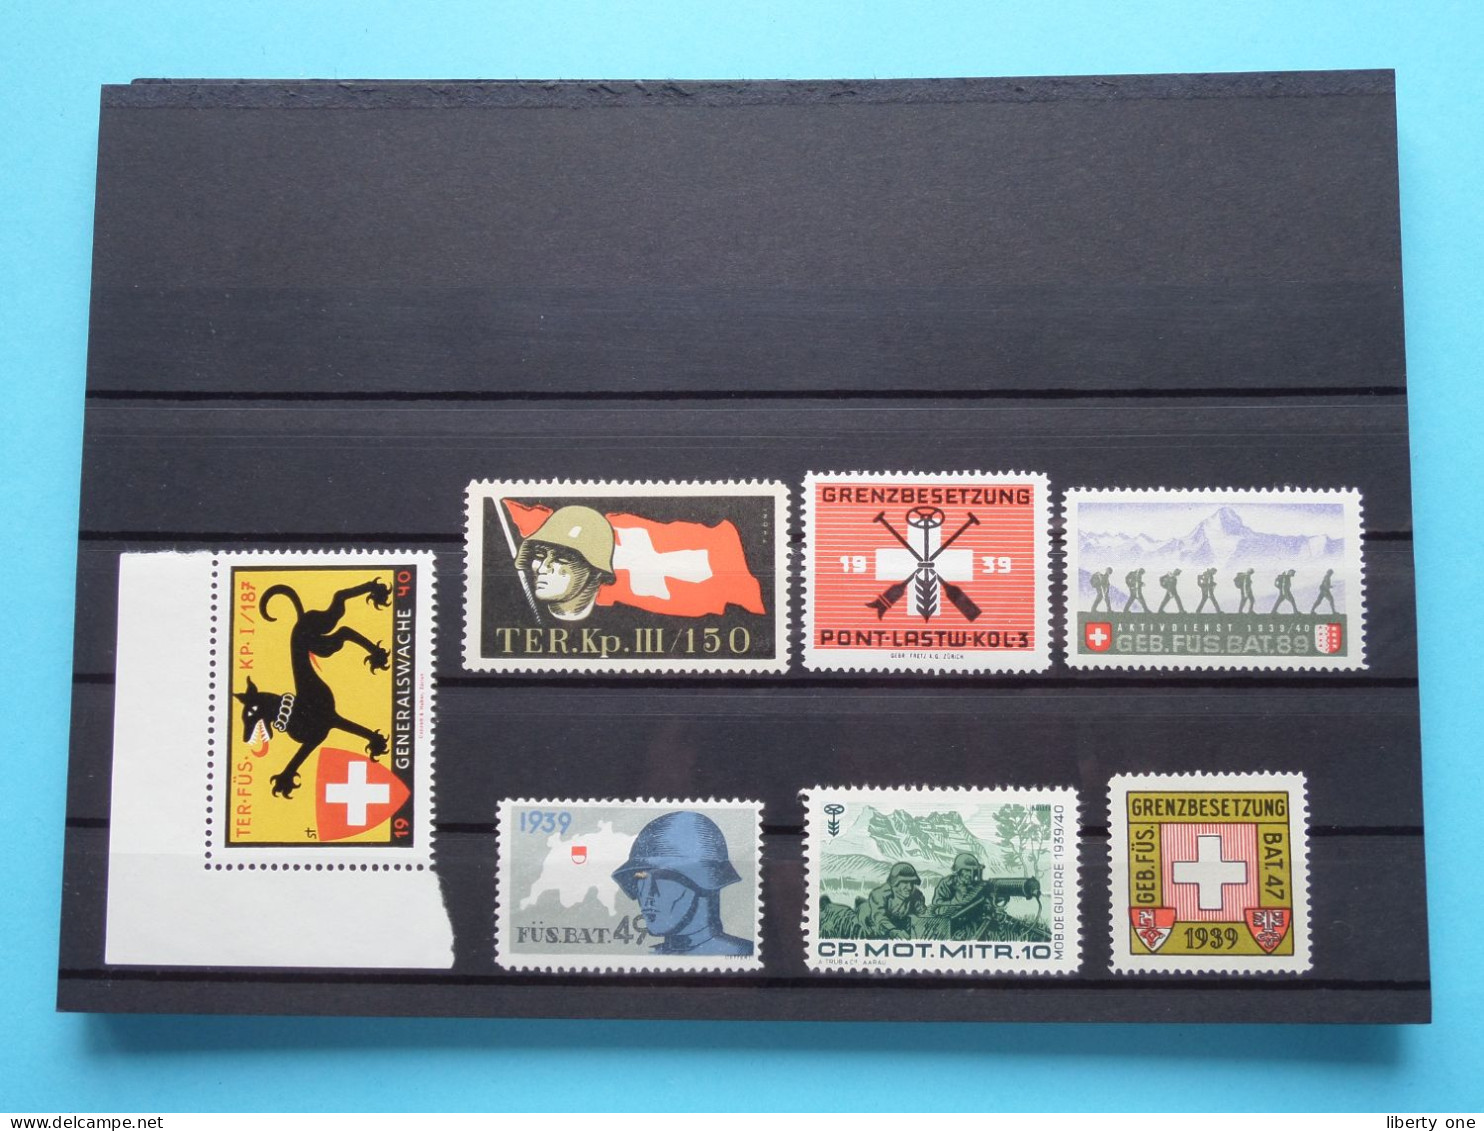 Lotje >> Sluitzegel Timbres-Vignettes Picture Stamp Verschlussmarken ( What You See Is What You Get ) La SUISSE ! - Seals Of Generality